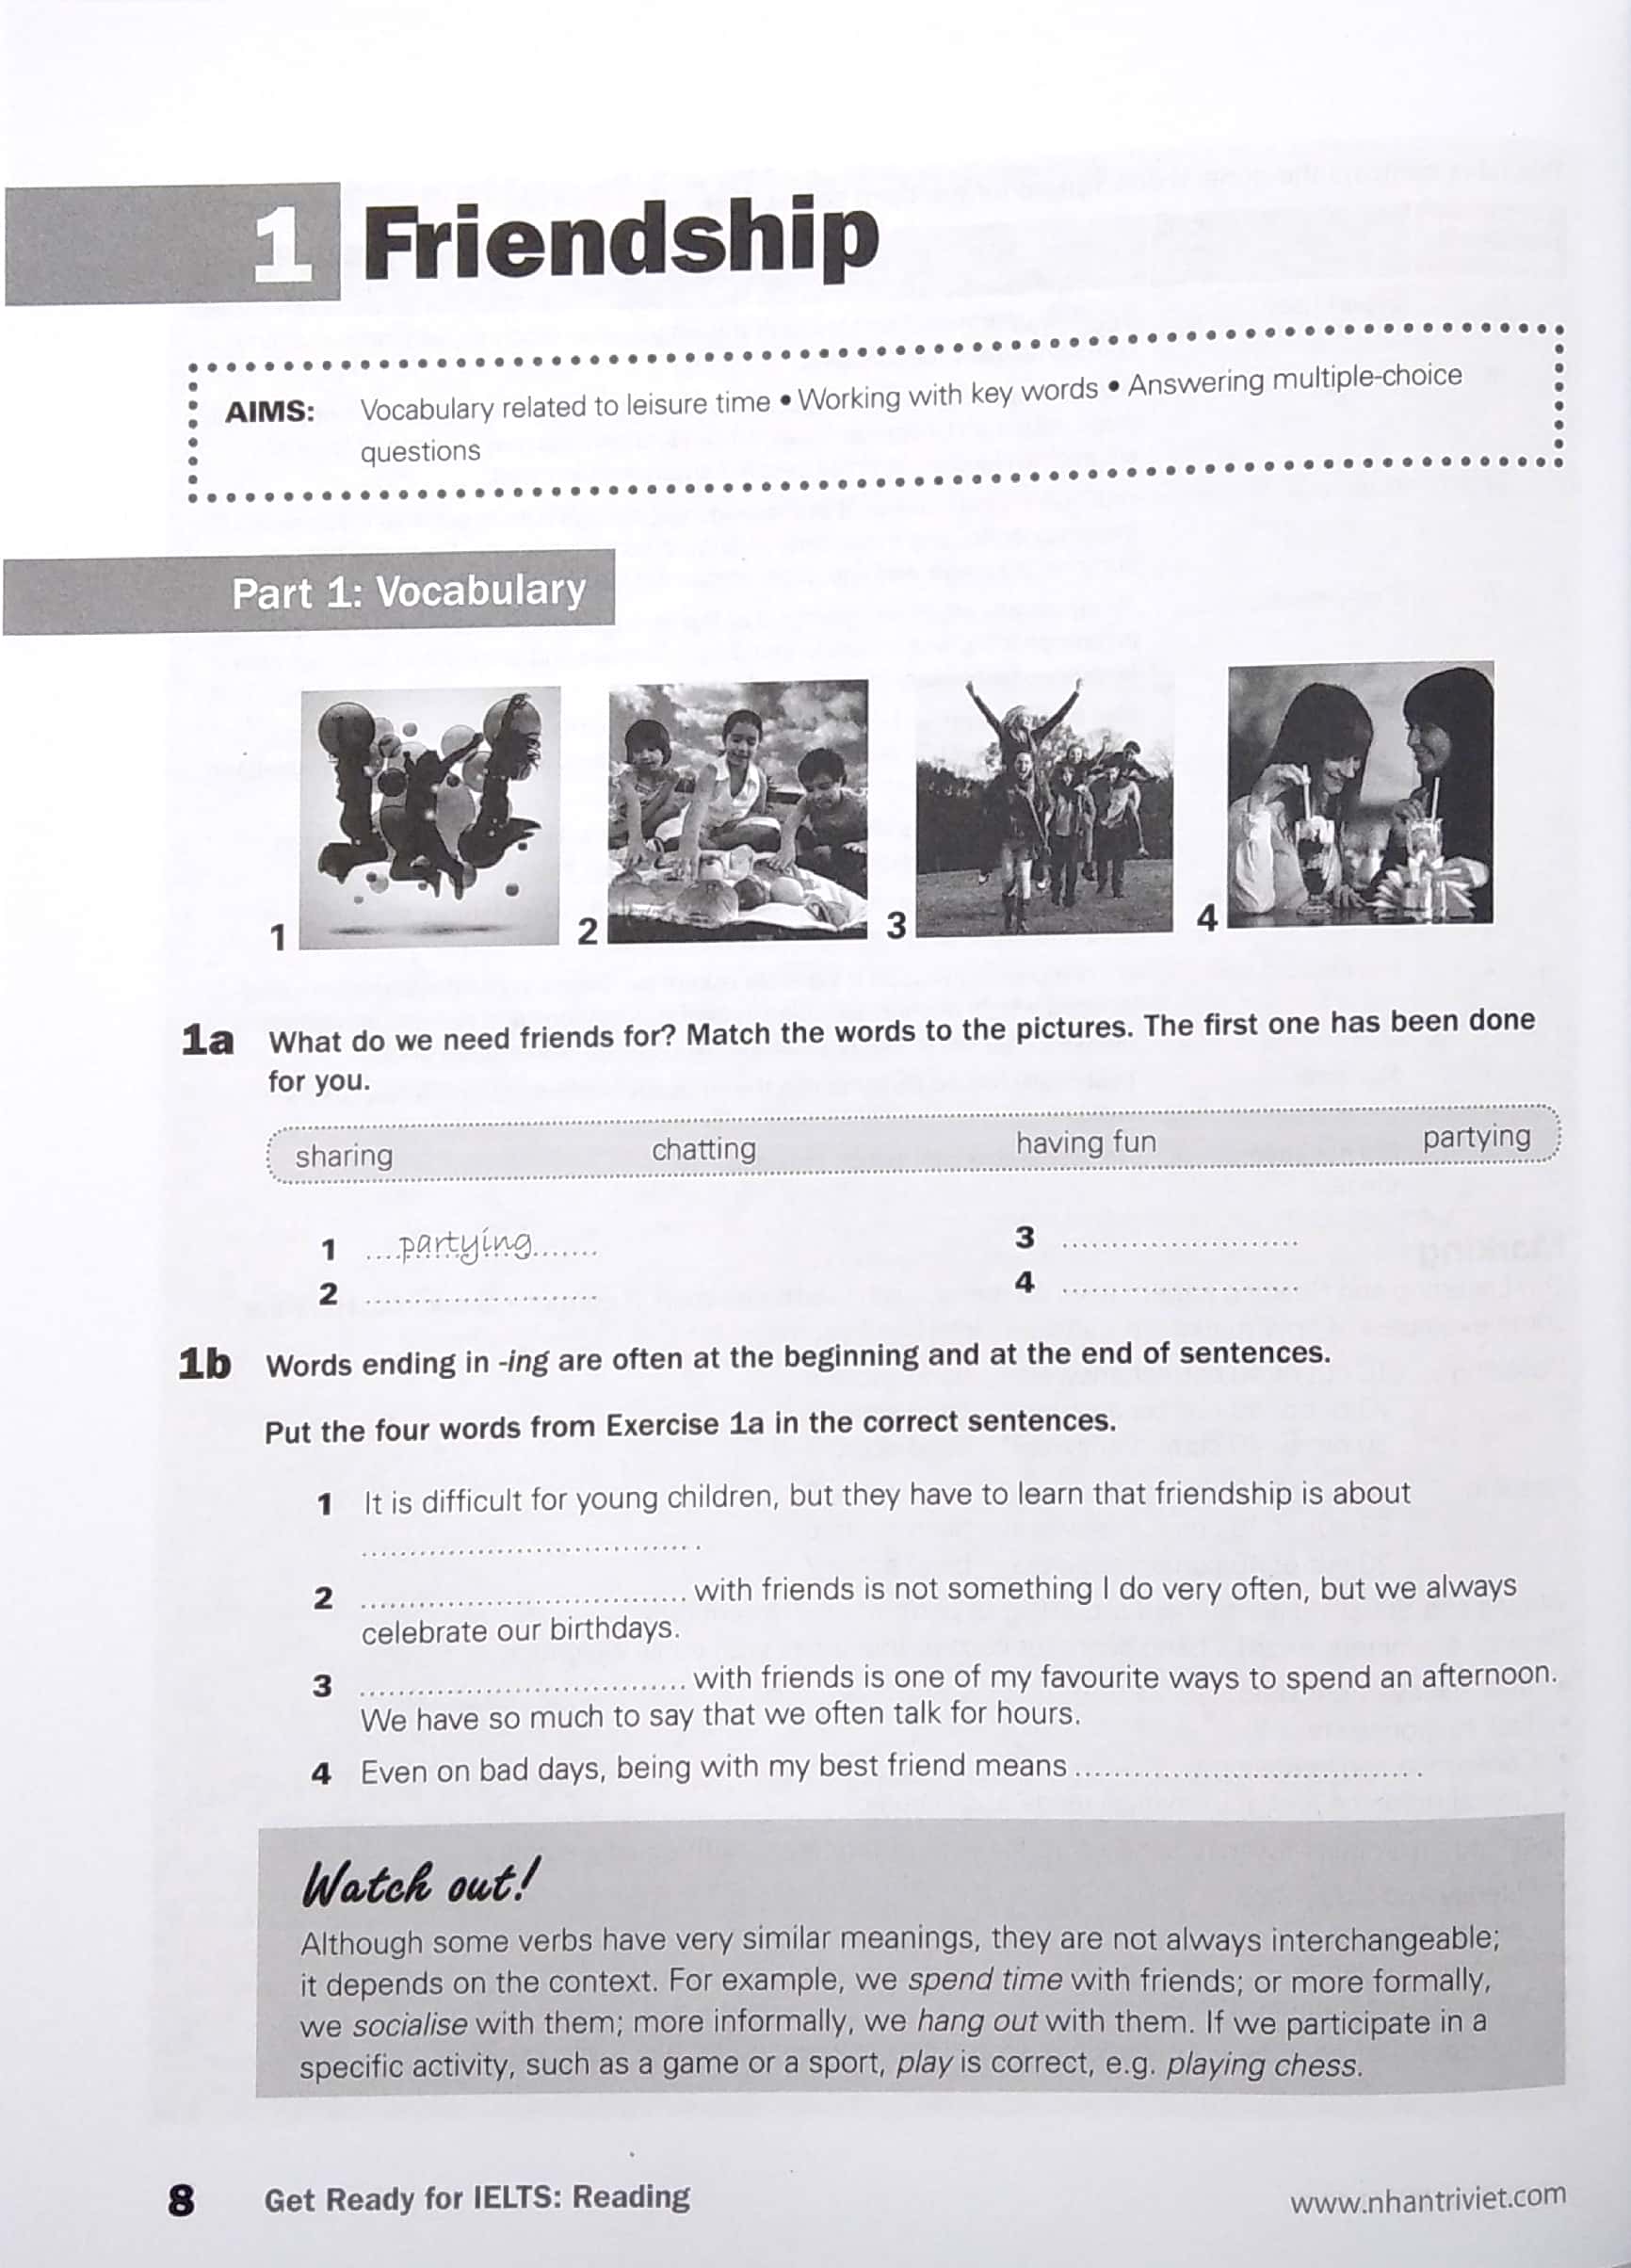 Collins - Get Ready For Ielts - Reading Pre-Intermediate A2 PDF